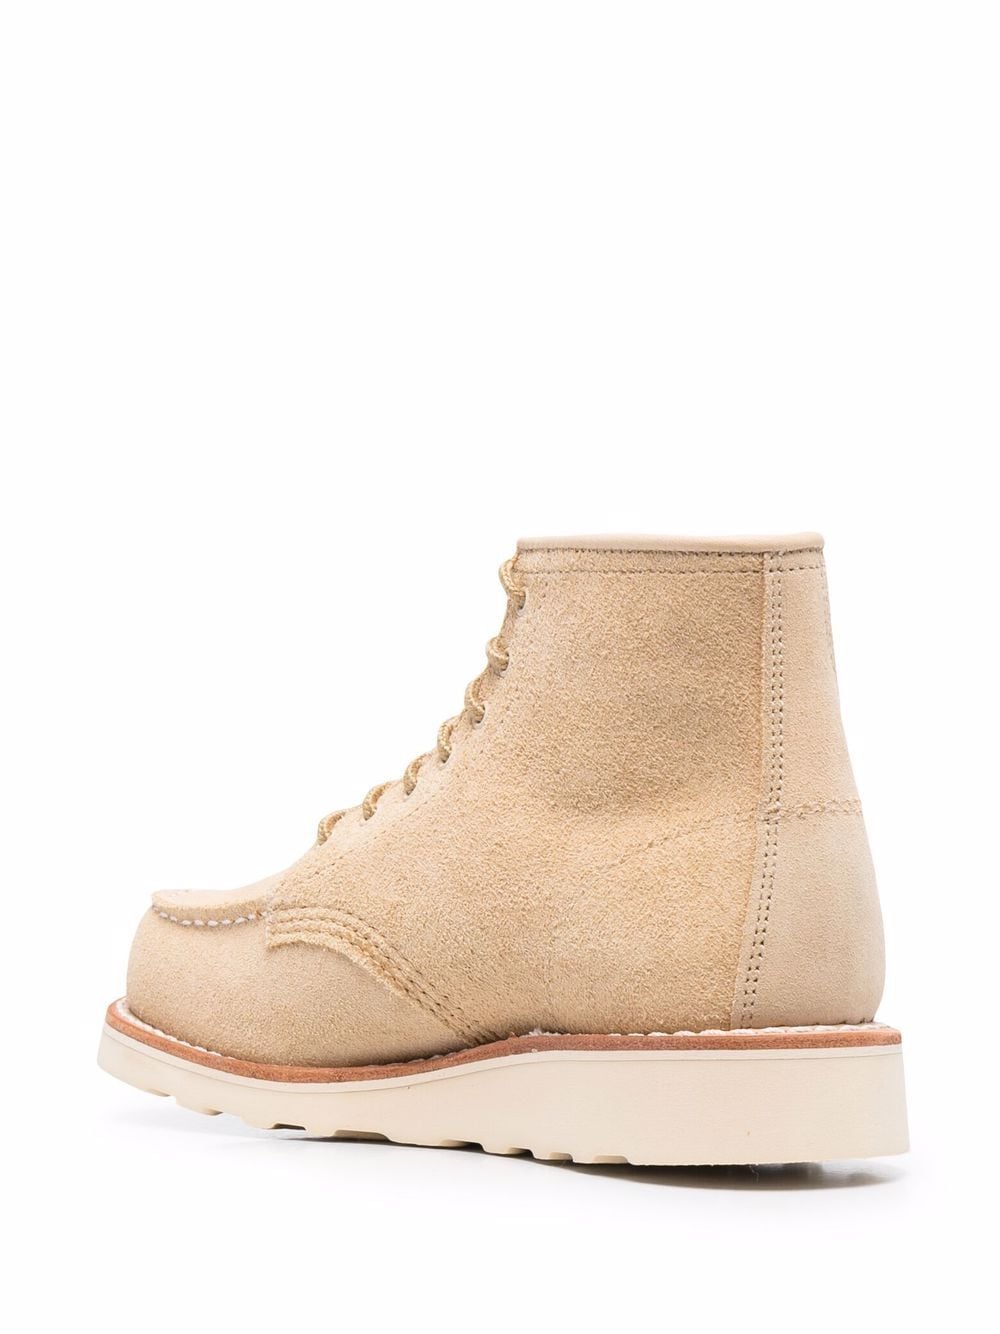 Red Wing Boots Beige